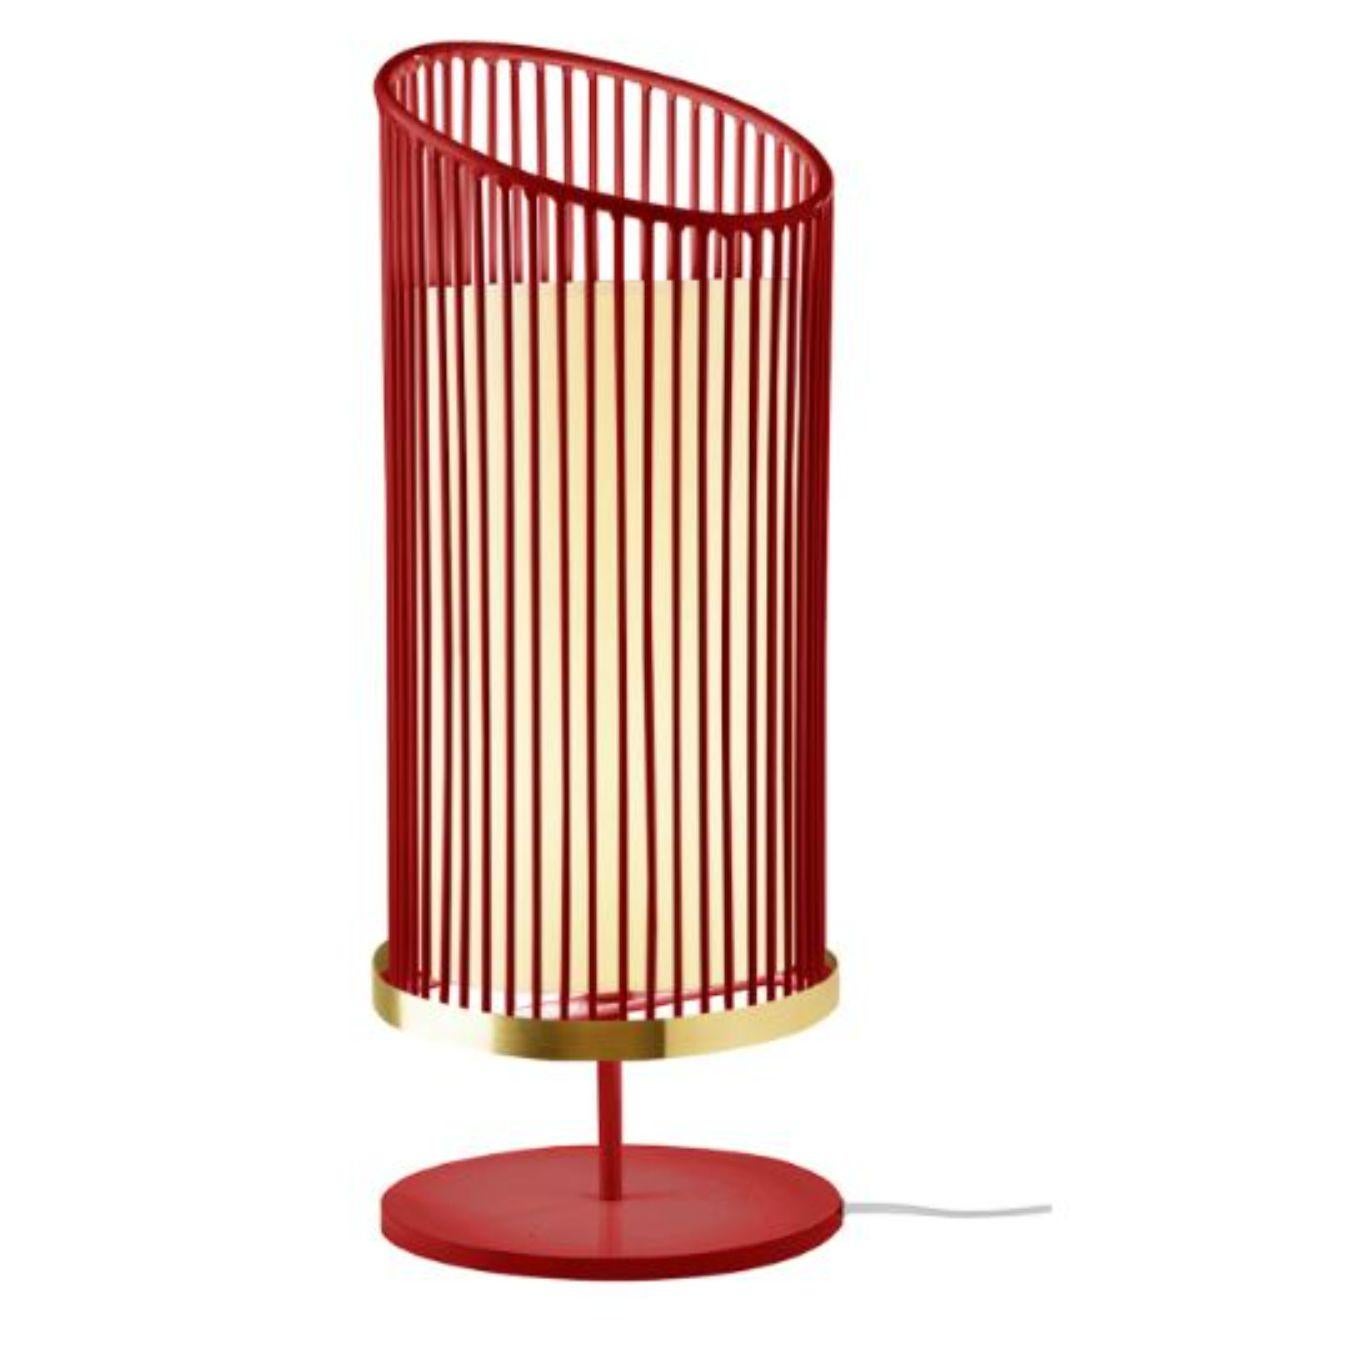 Lipstick new spider table lamp with brass ring by Dooq.
Dimensions: W 24 x D 24 x H 60 cm.
Materials: lacquered metal, polished or brushed metal, brass.
Also available in different colors and materials. 

Information:
230V/50Hz
E27/1x20W